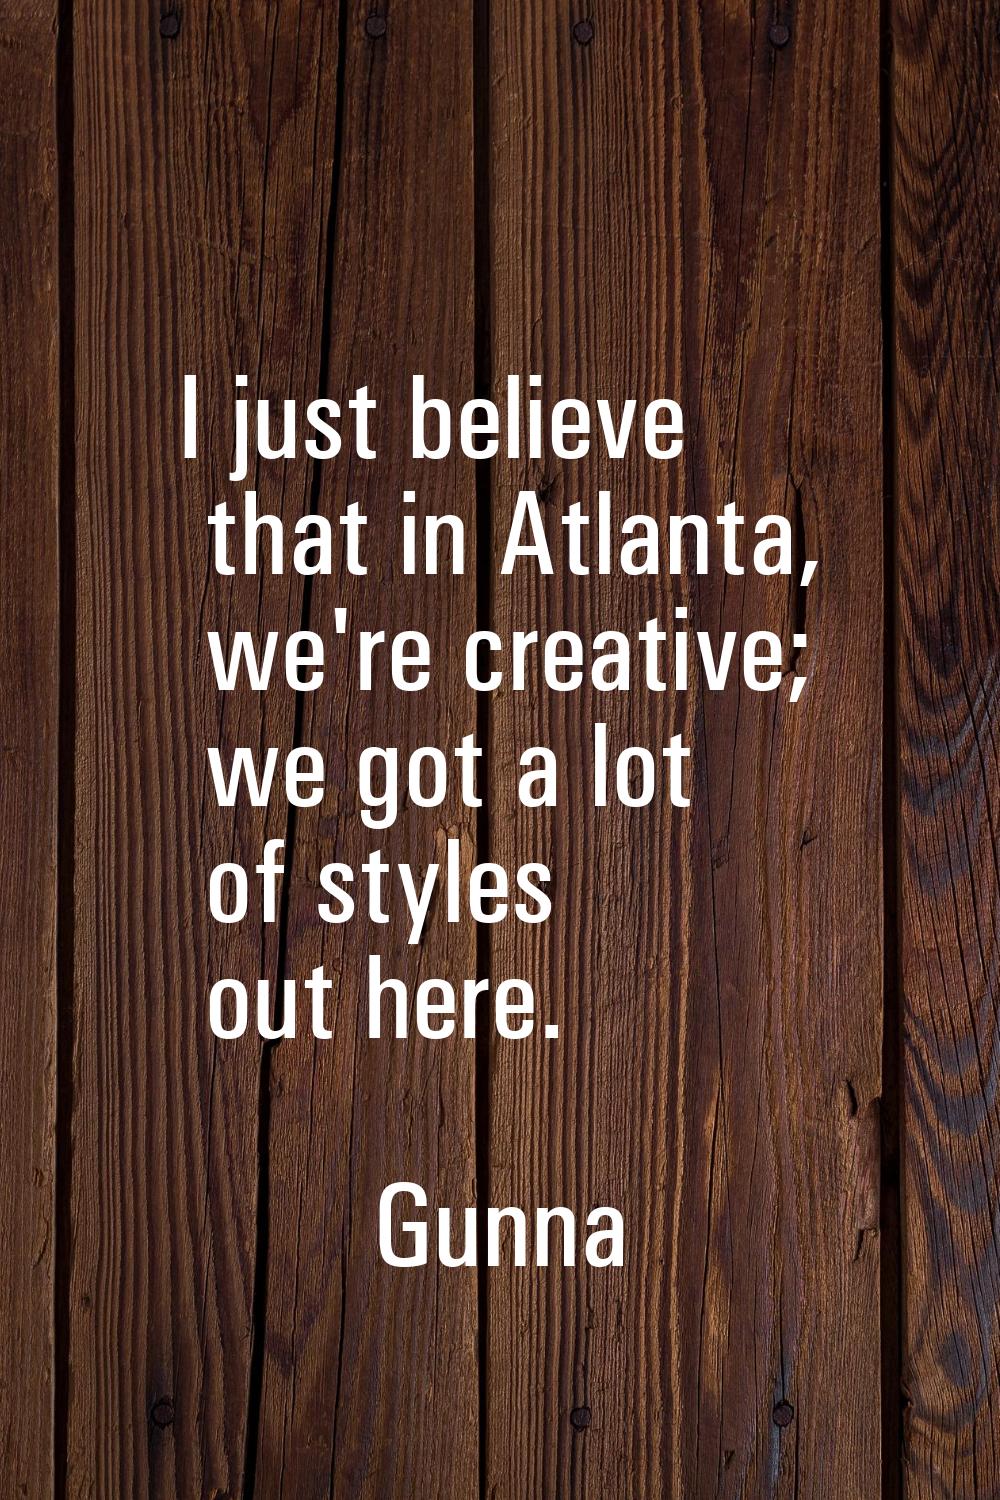 I just believe that in Atlanta, we're creative; we got a lot of styles out here.